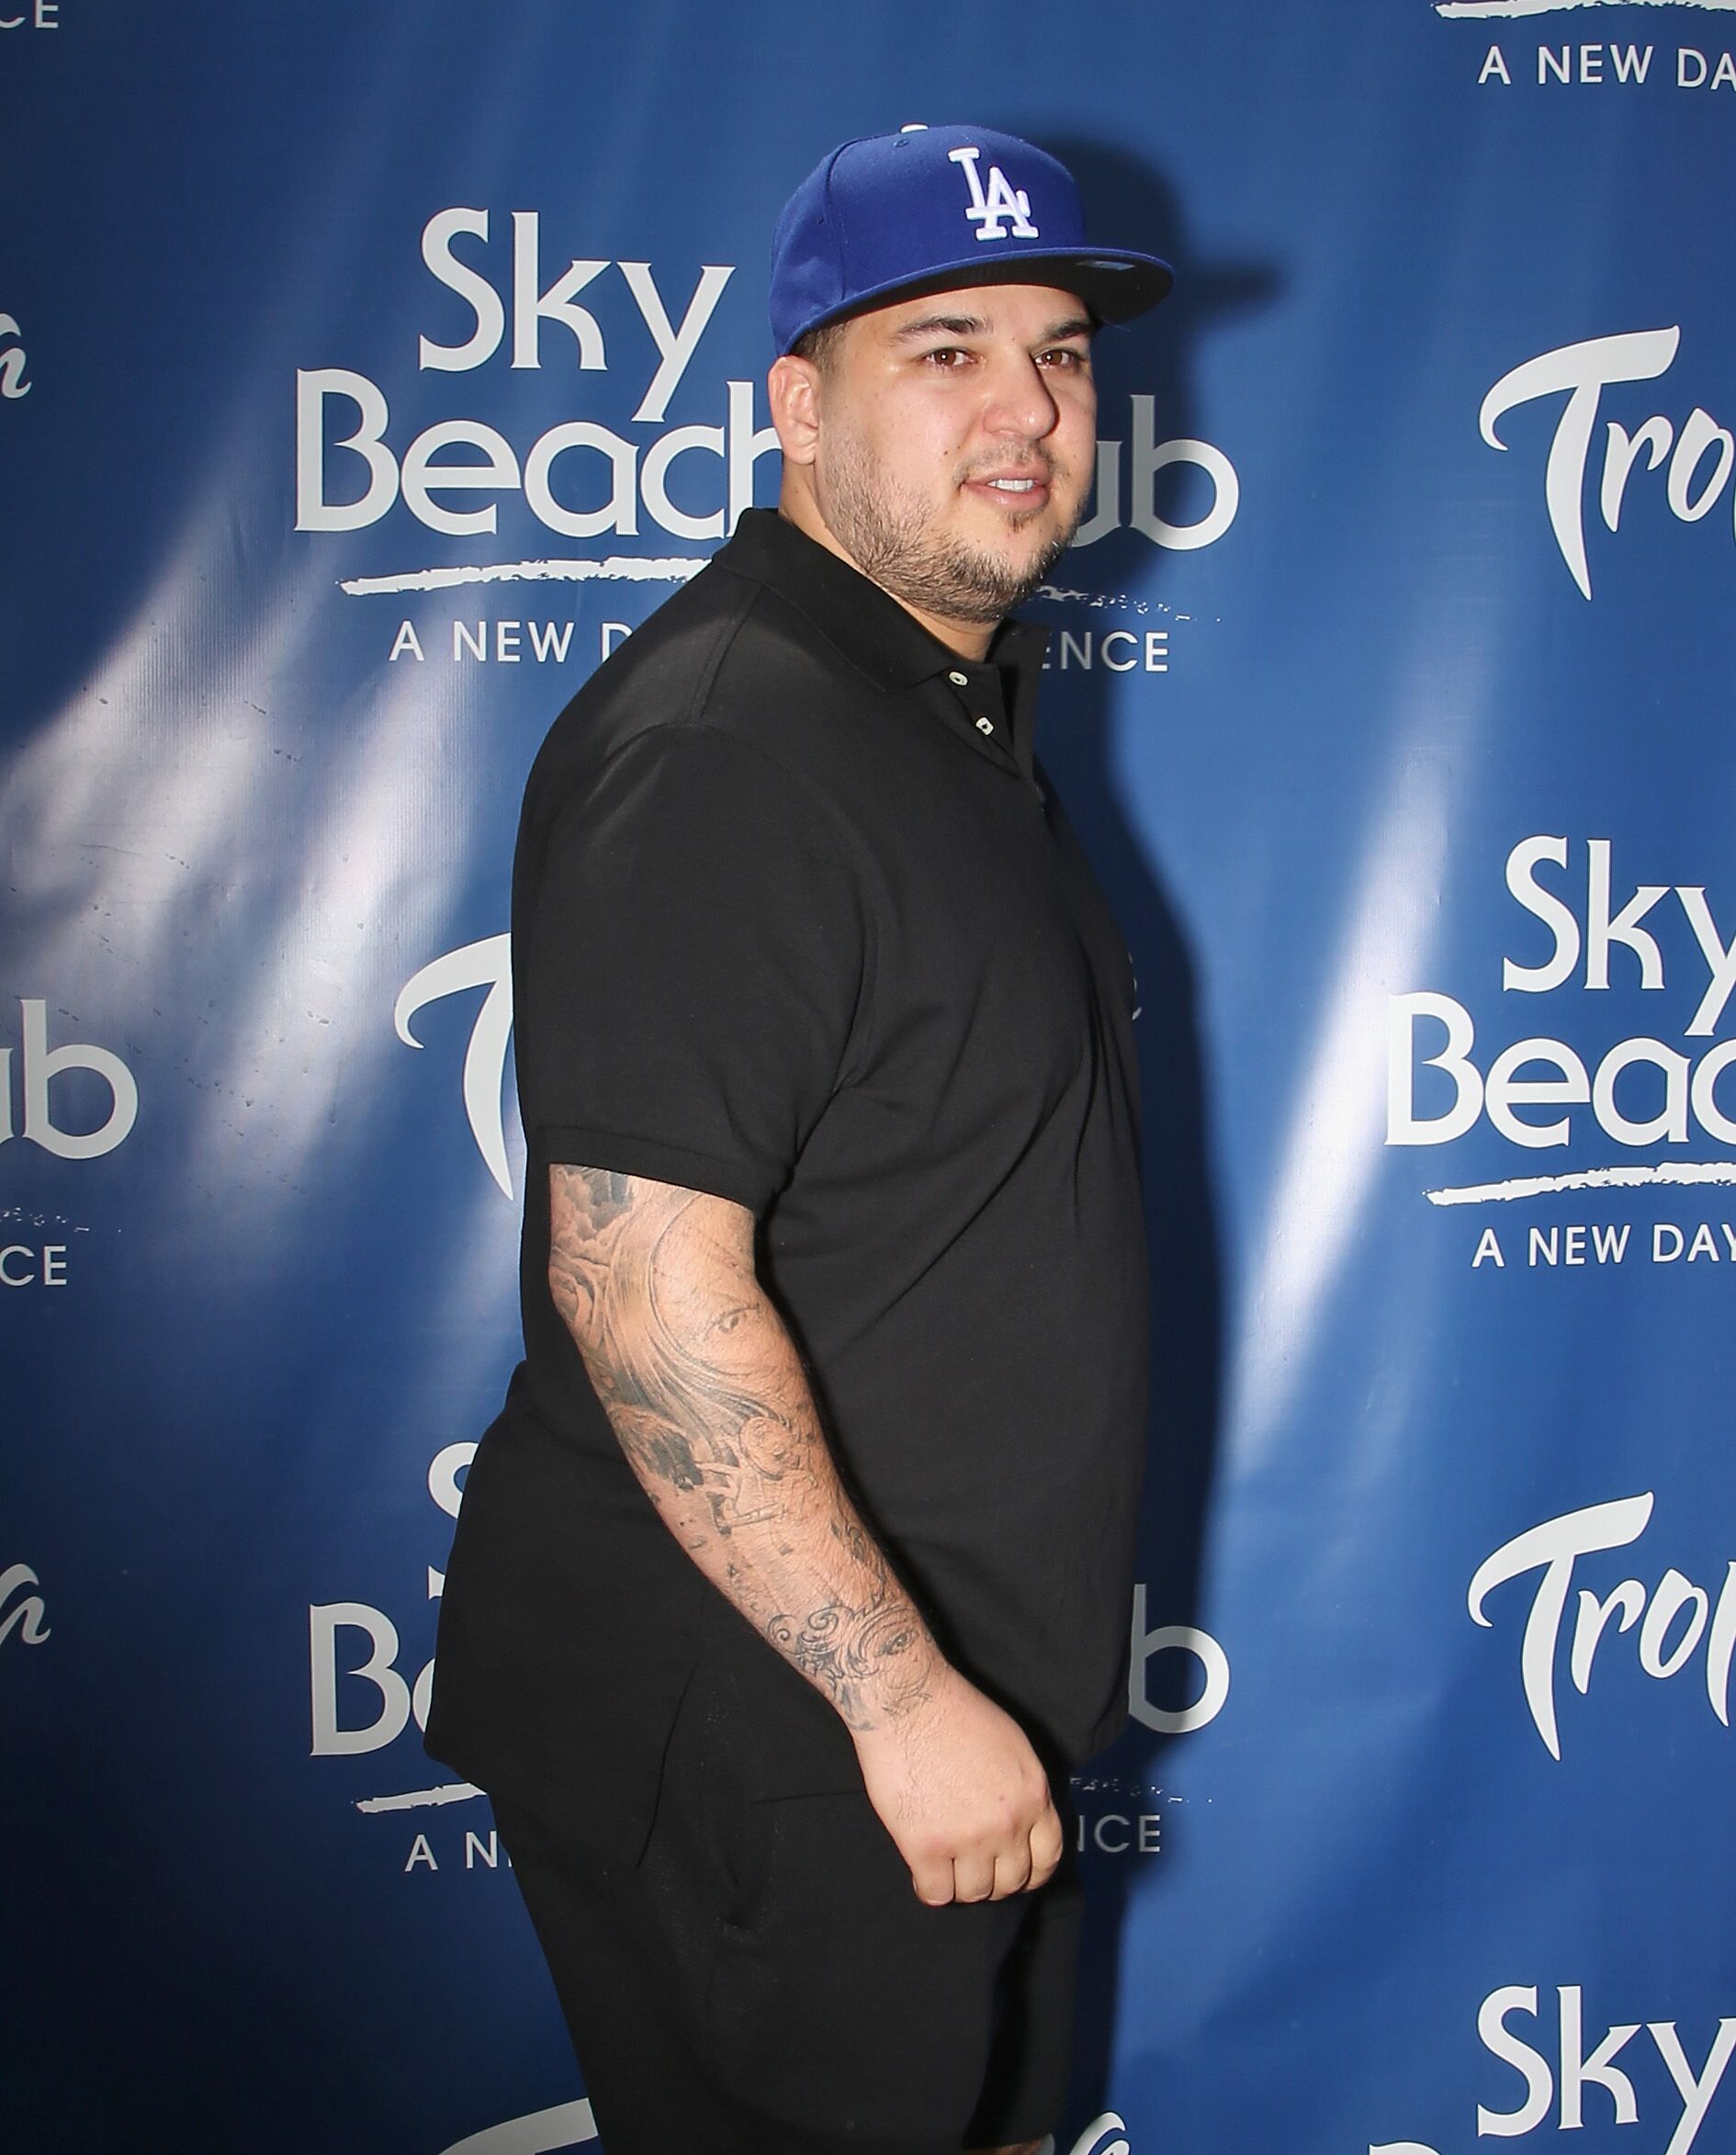 Rob Kardashian attends the Sky Beach Club at the Tropicana Las Vegas on May 28, 2016 in Las Vegas, Nevada | Photo: Getty Images